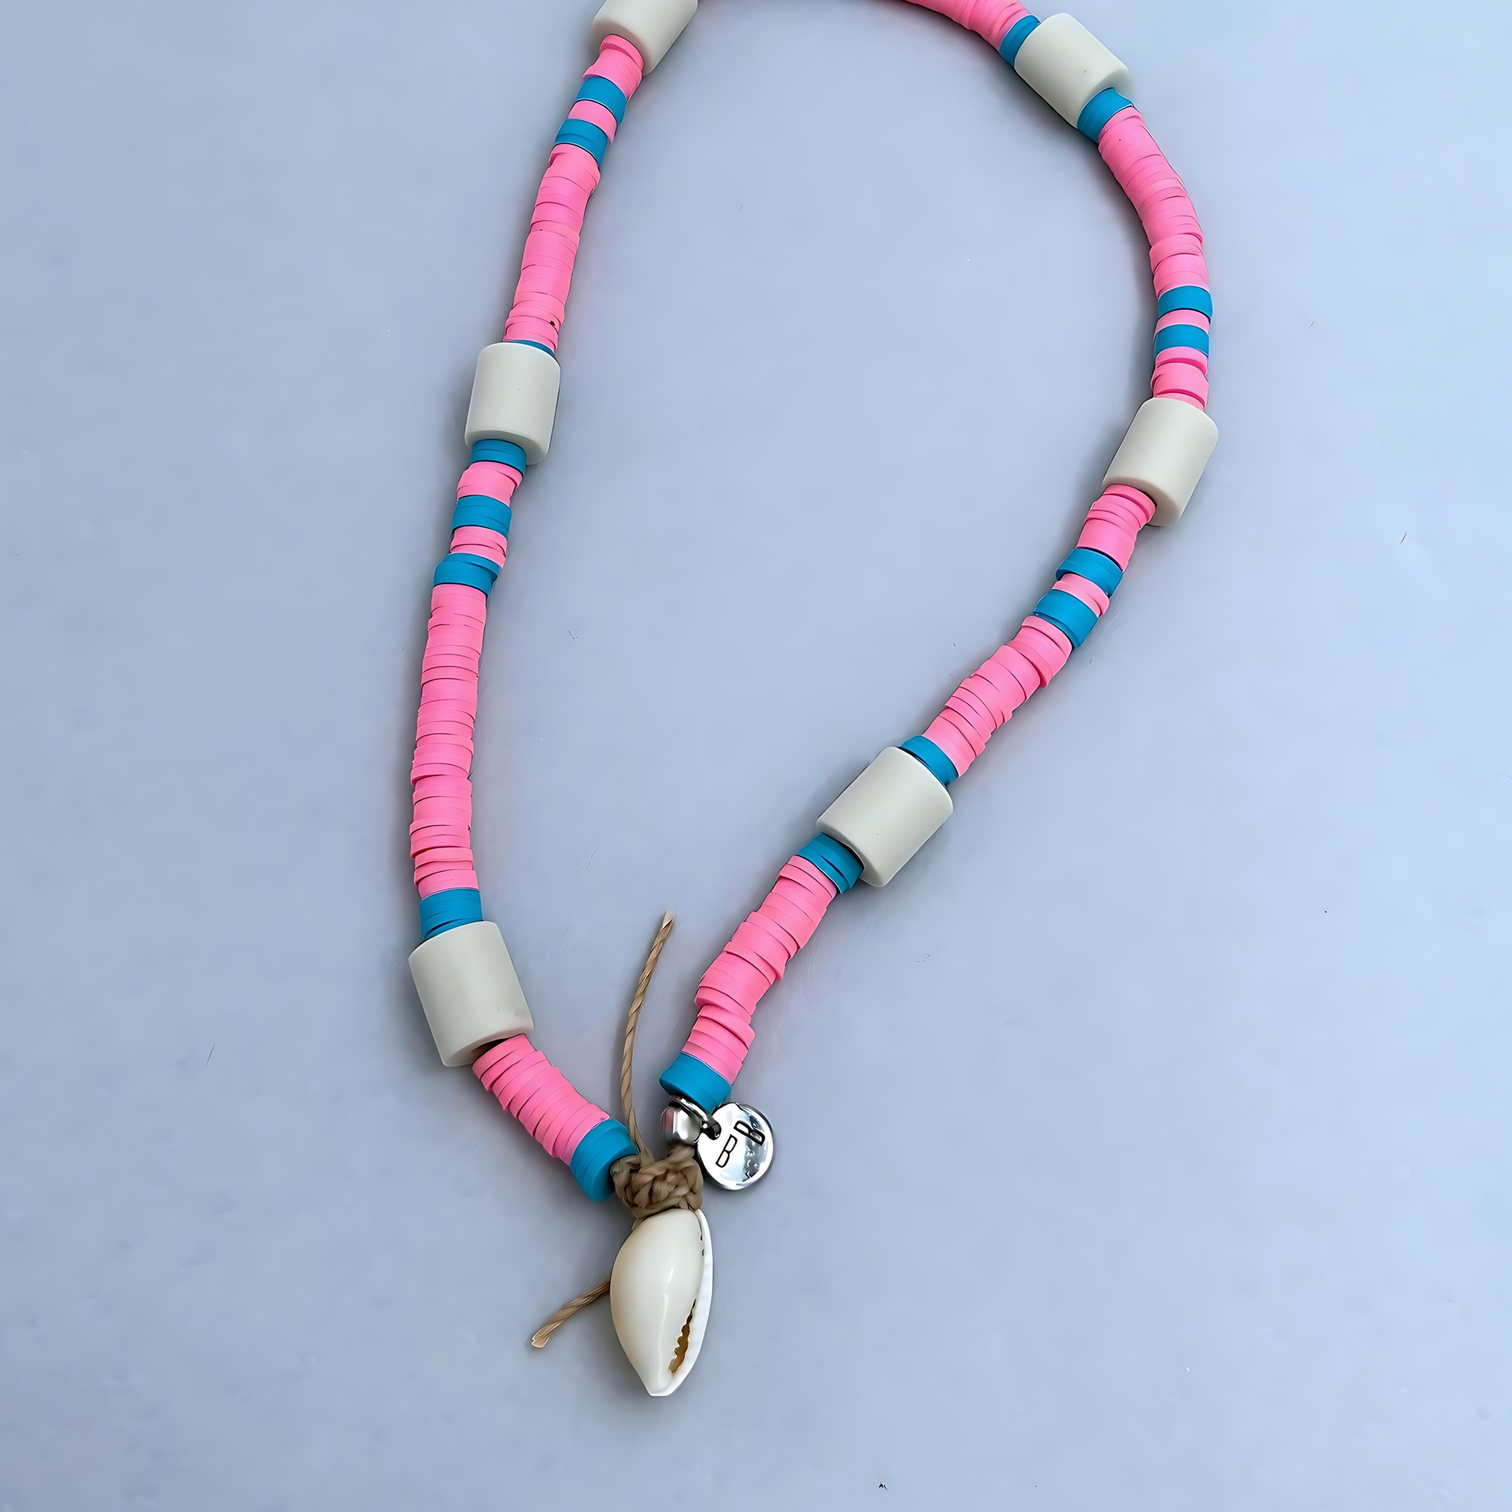 The cool surfer's look anti-tick dog necklace in a bubblegum pink colour. Detail Shot